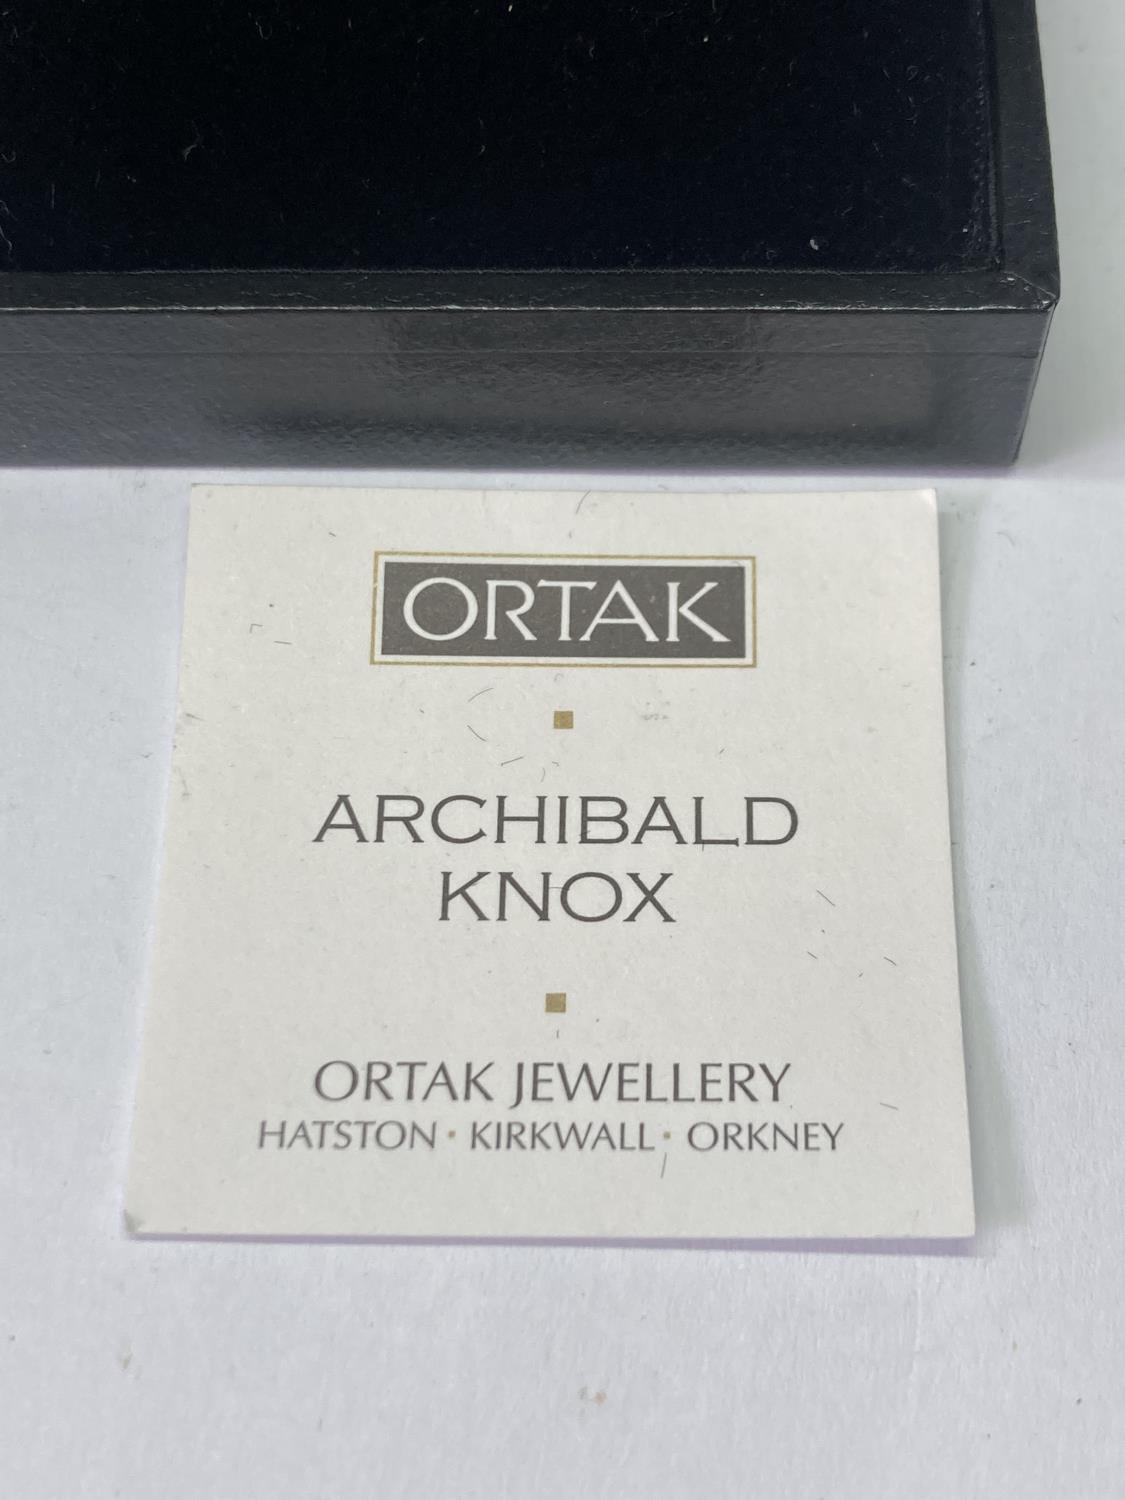 A PAIR OF ARCHIBALD KNOX SILVER EARRINGS IN A PRESENTATION BOX - Image 3 of 3